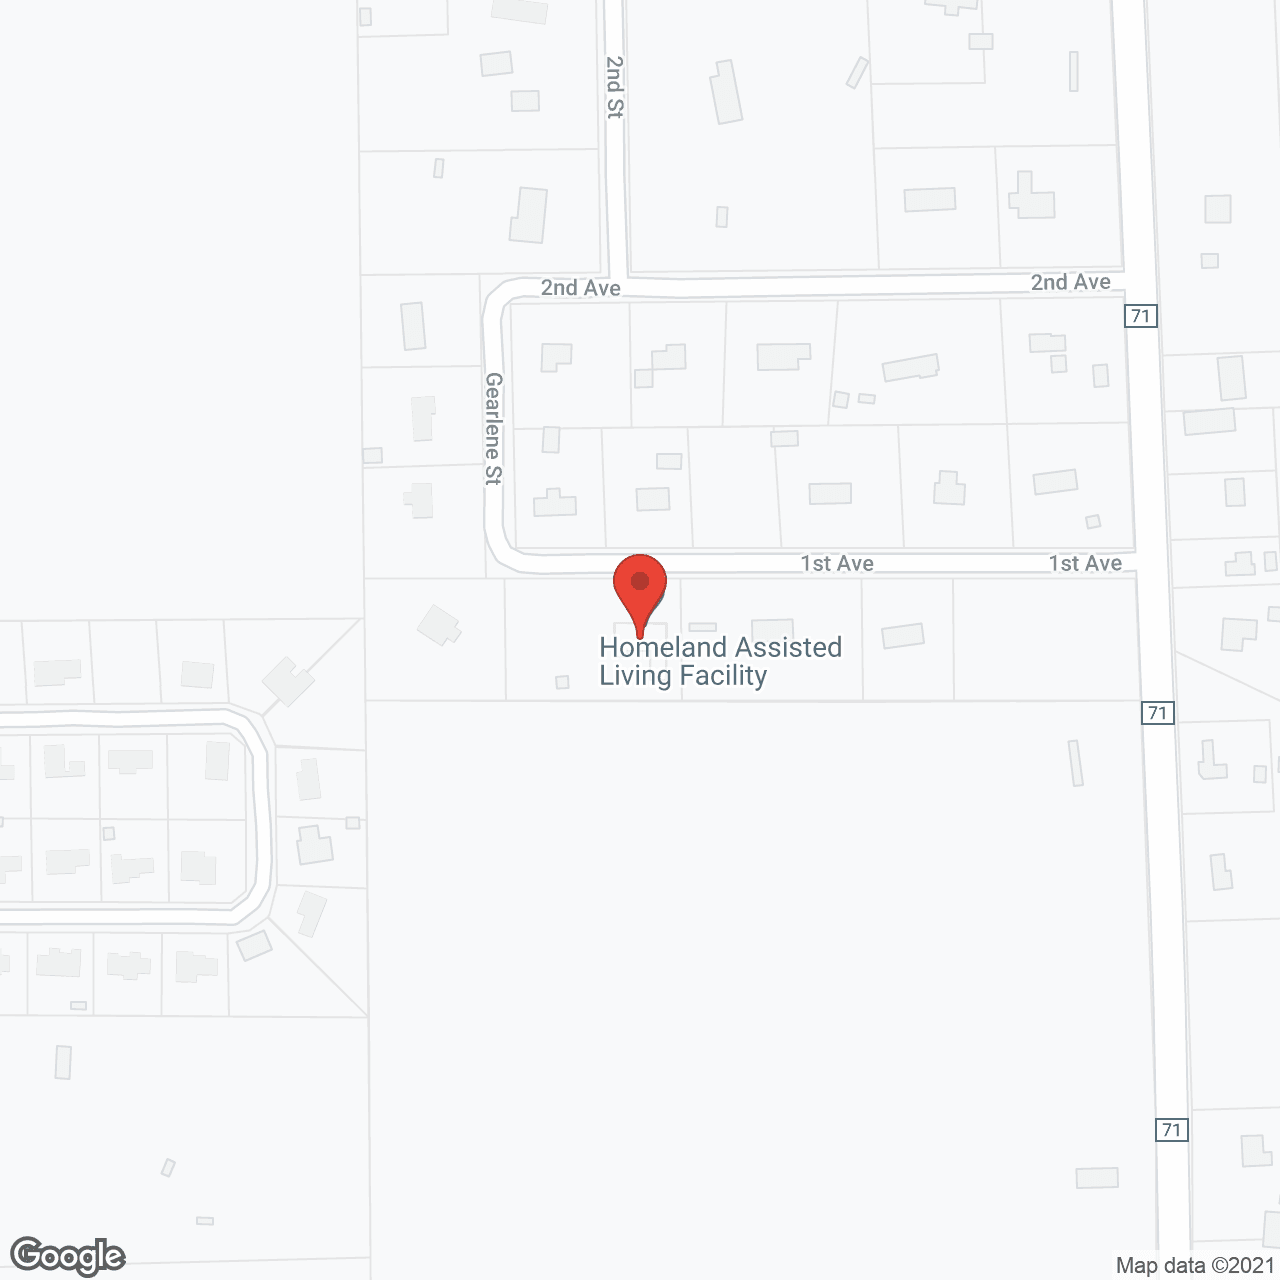 Homeland Assisted Living Facility in google map